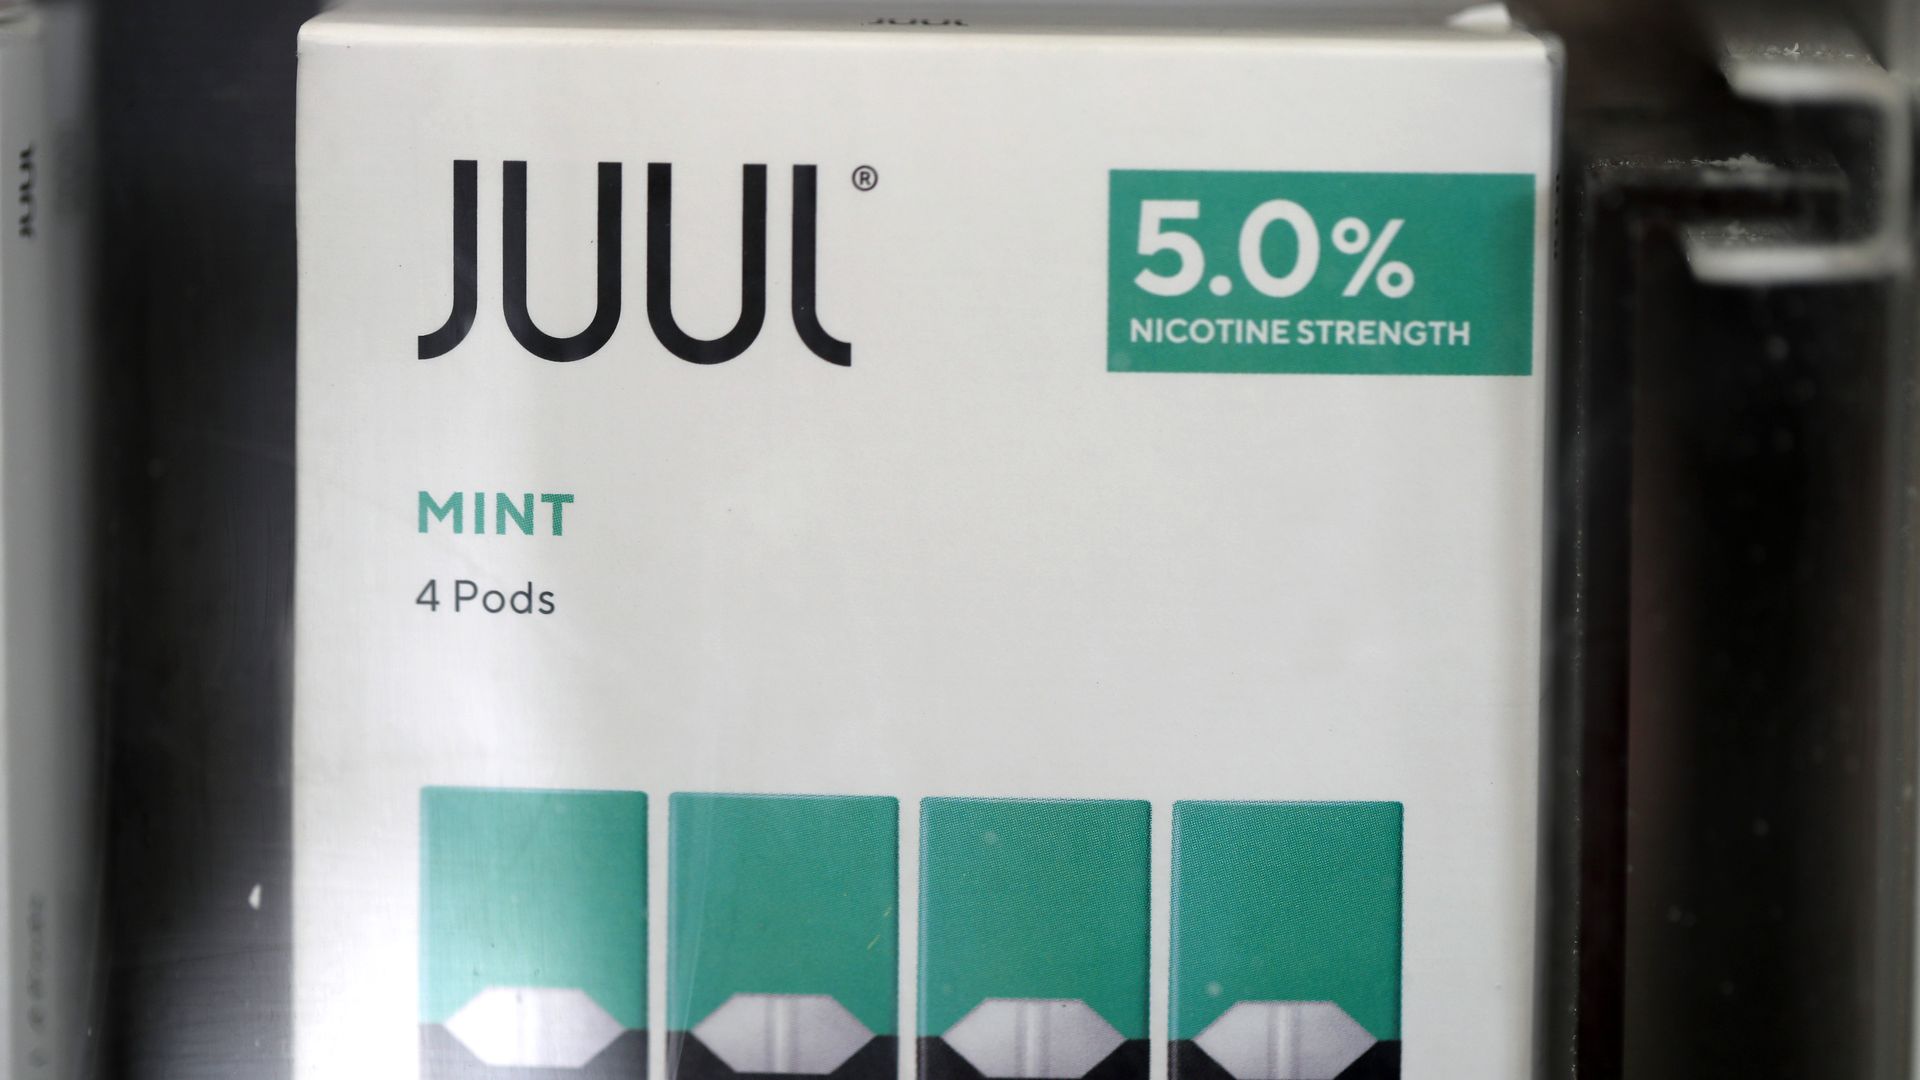 Packages of Juul mint flavored e-cigarettes are displayed at San Rafael Smokeshop on November 07, 2019 in San Rafael, California.